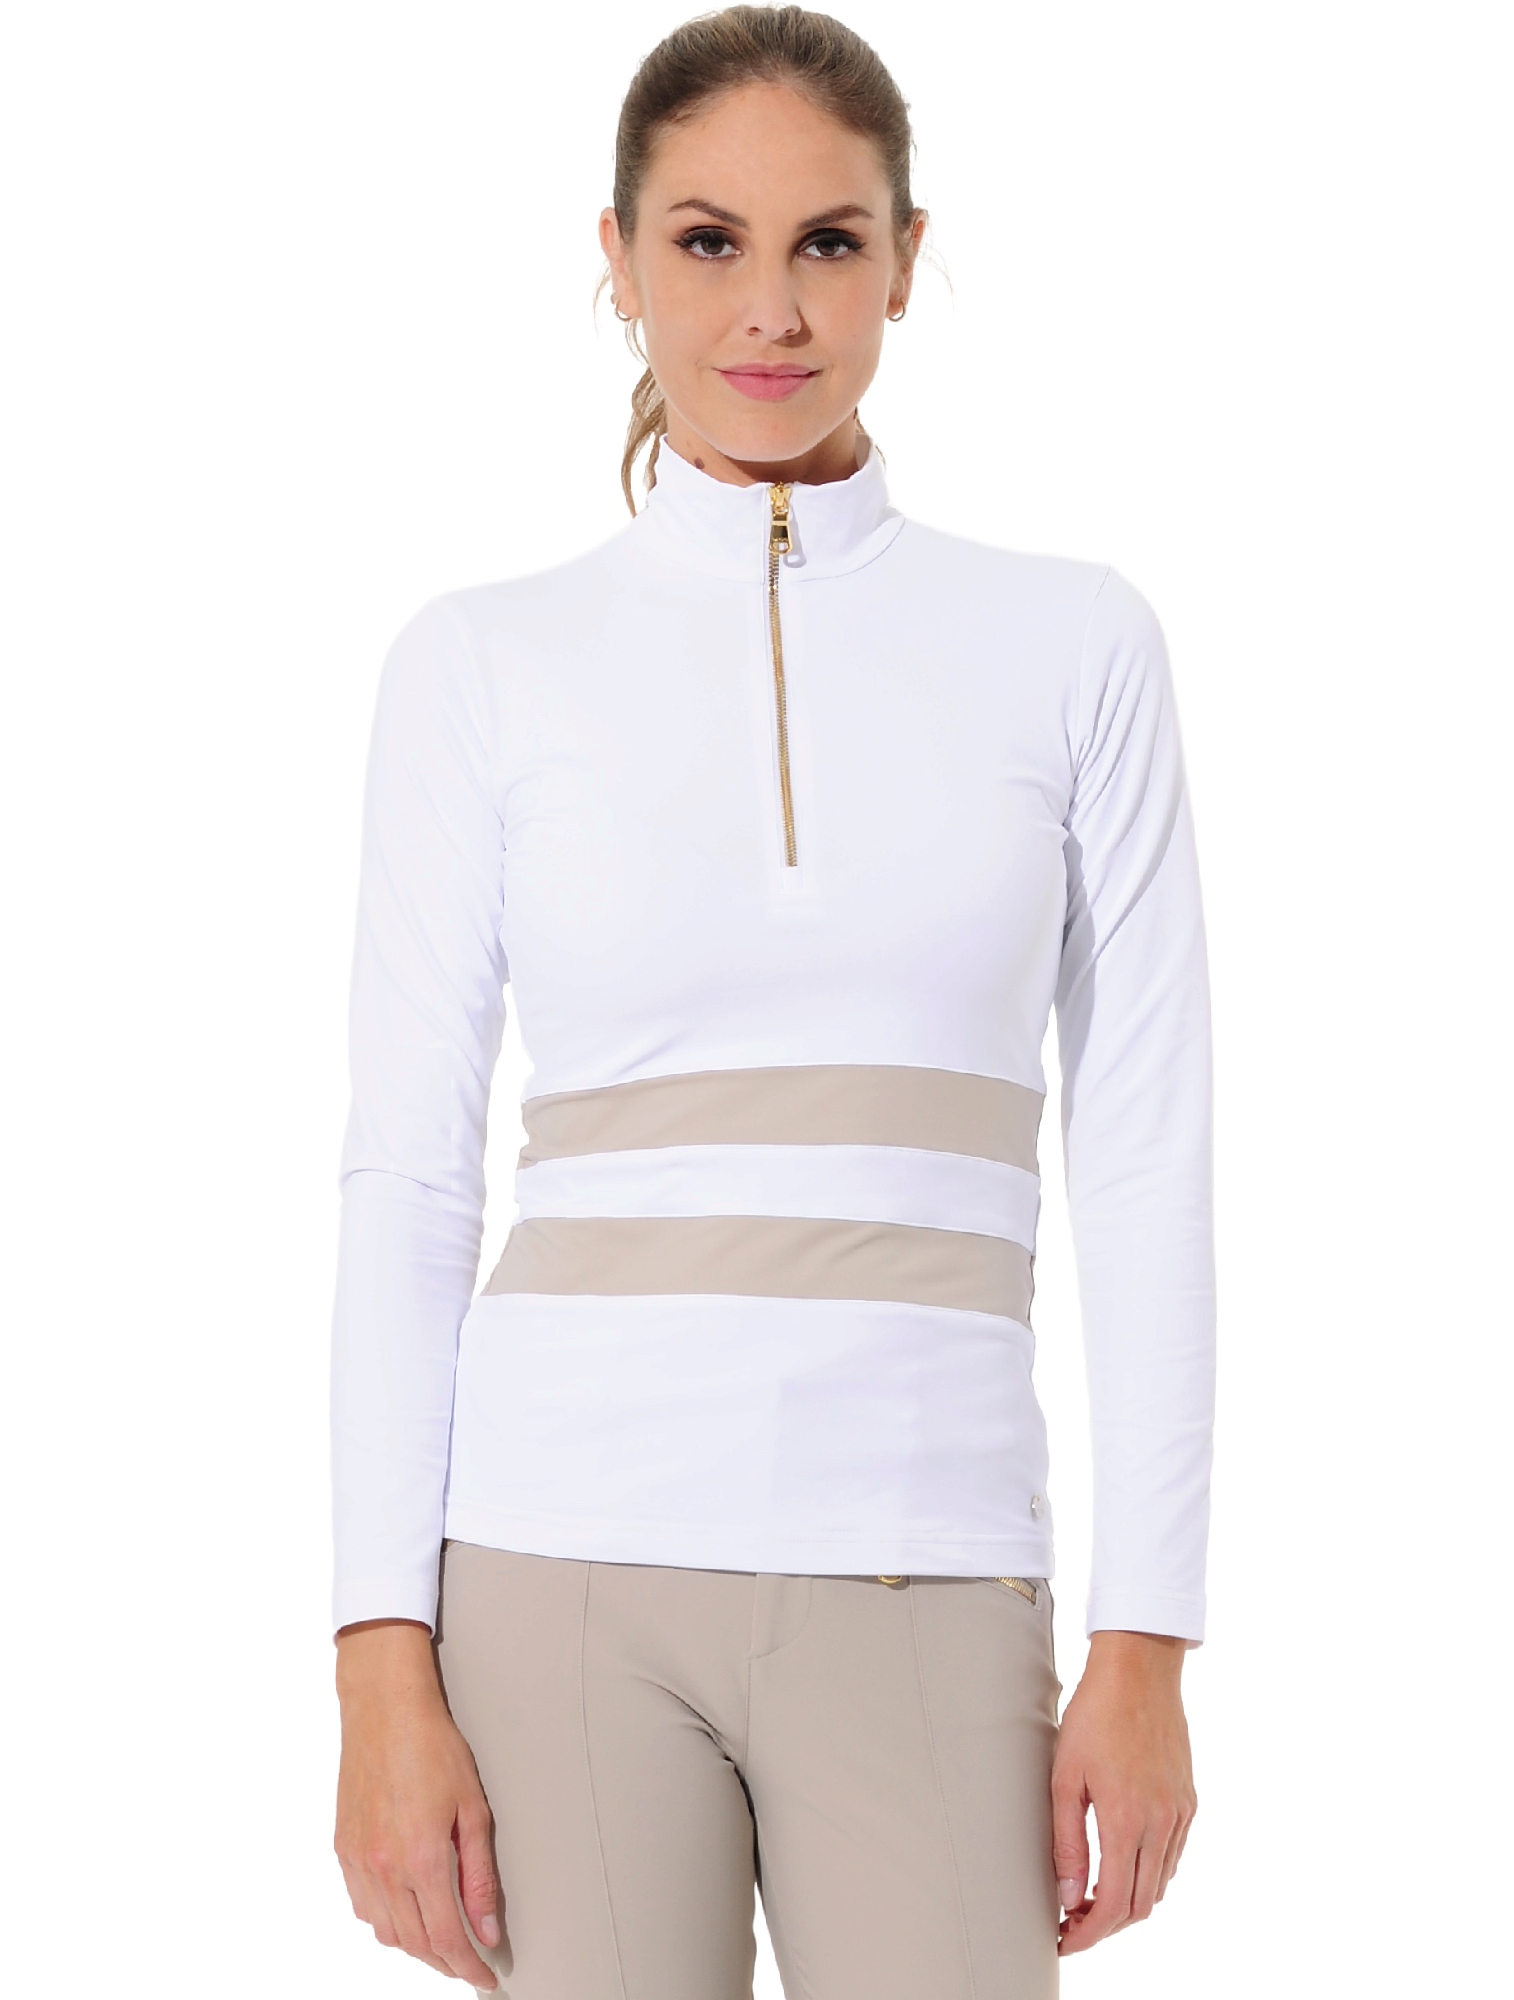 Jersey zip golf polo shirt white/light taupe 